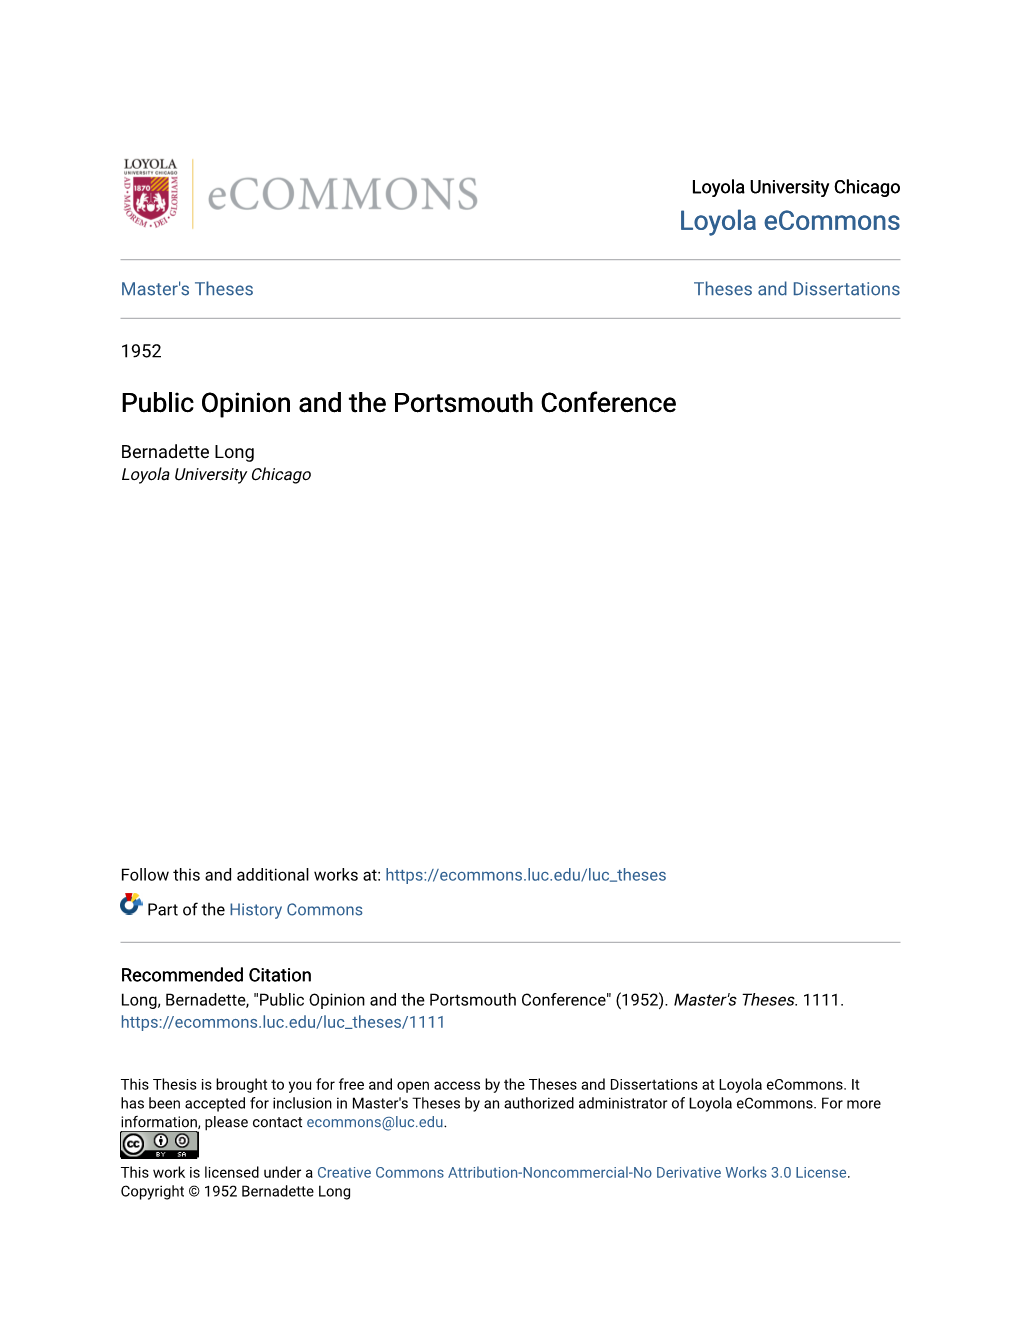 Public Opinion and the Portsmouth Conference